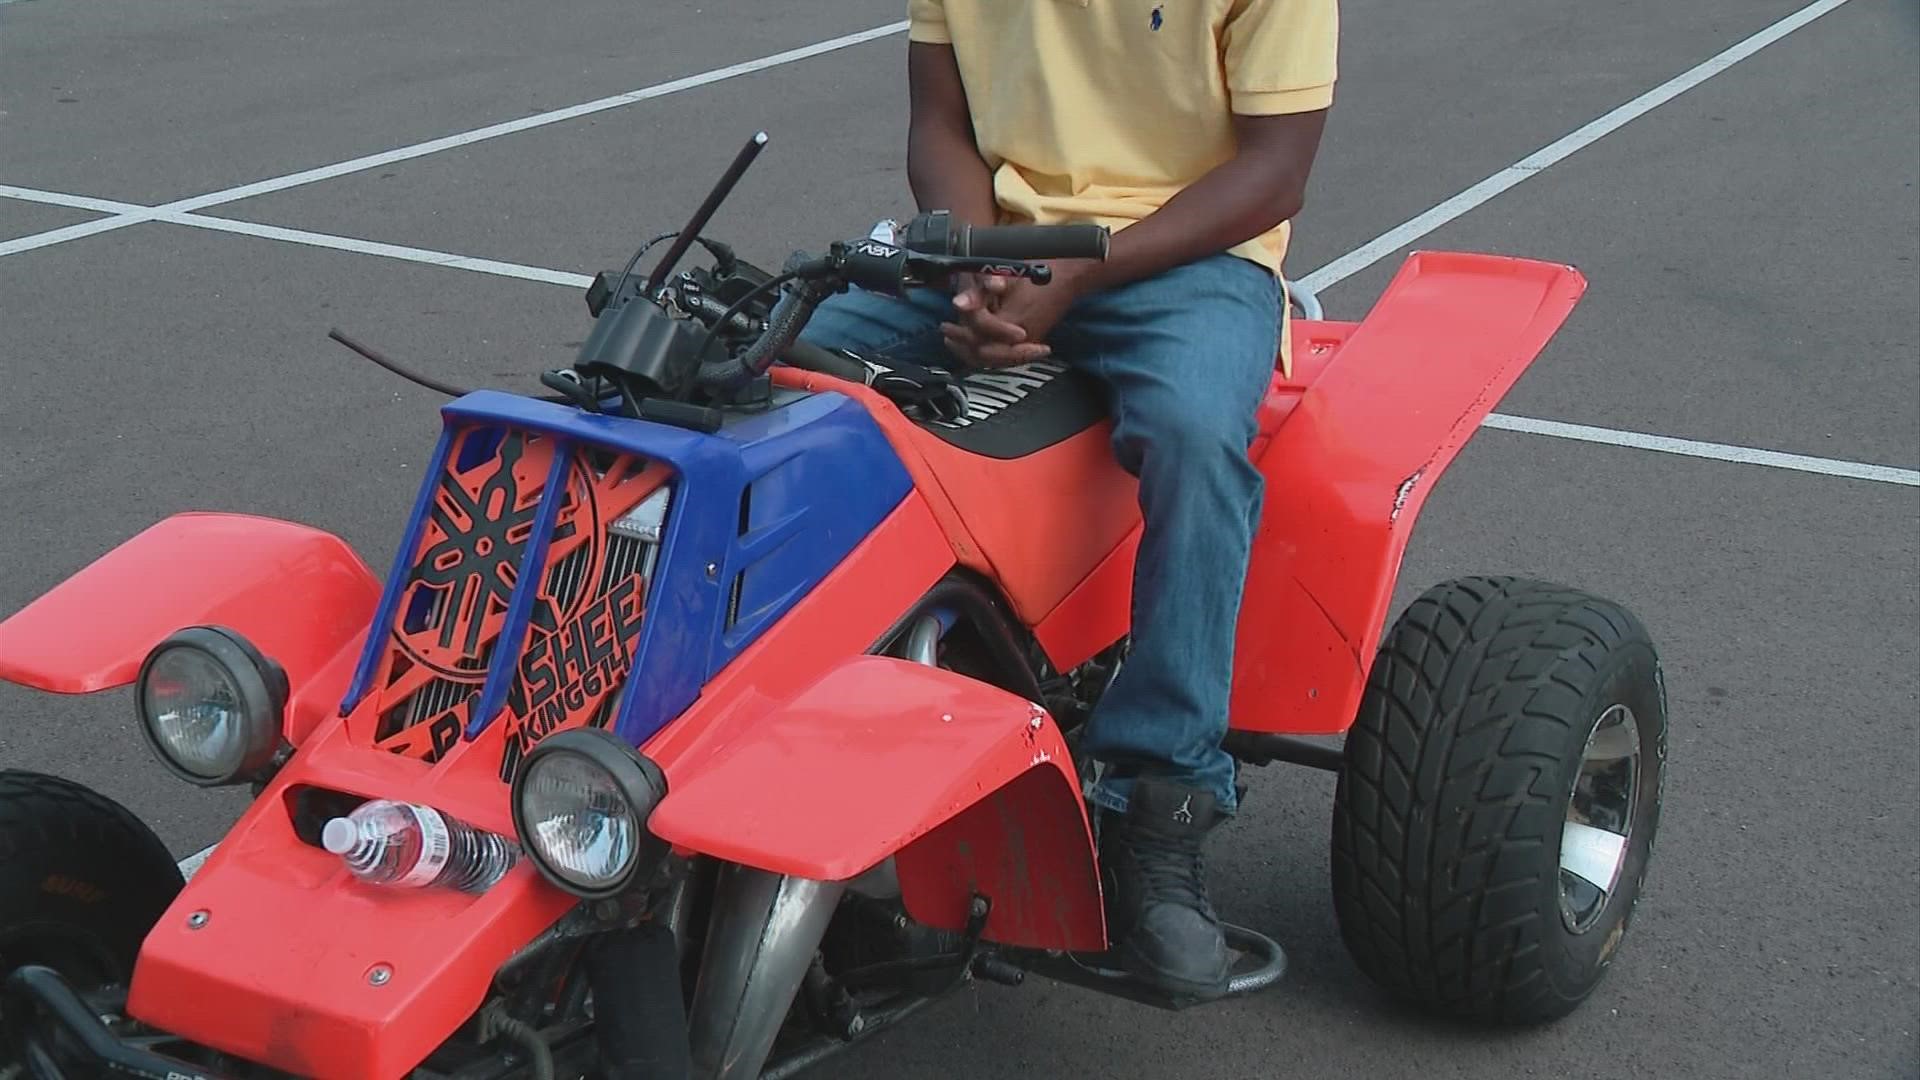 There have been over 700 complaints about ATVs and bikes riding around the streets of Columbus.